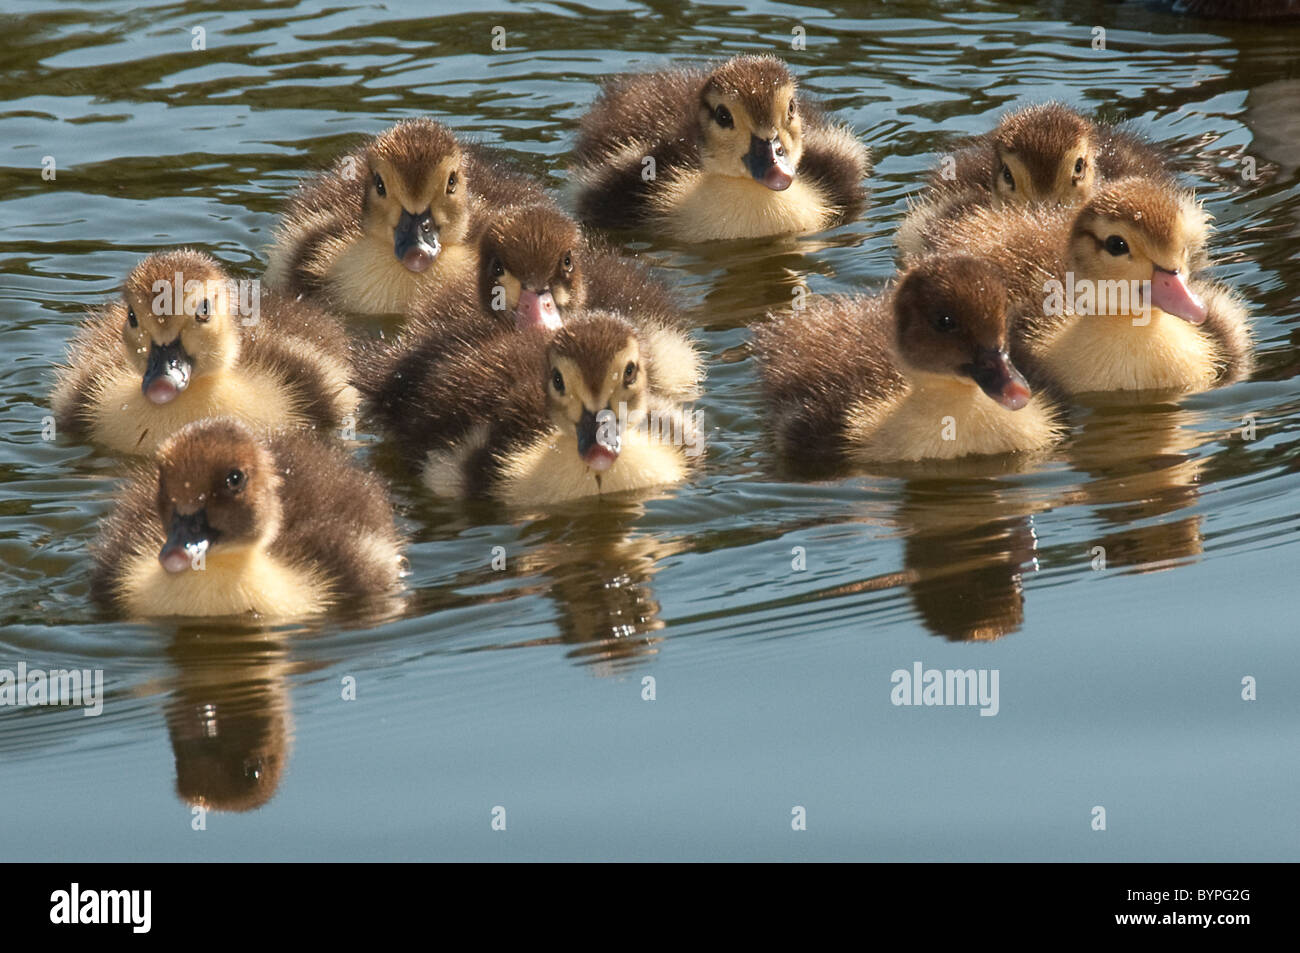 'Flotilla' - muscovy ducklings swimming together Stock Photo